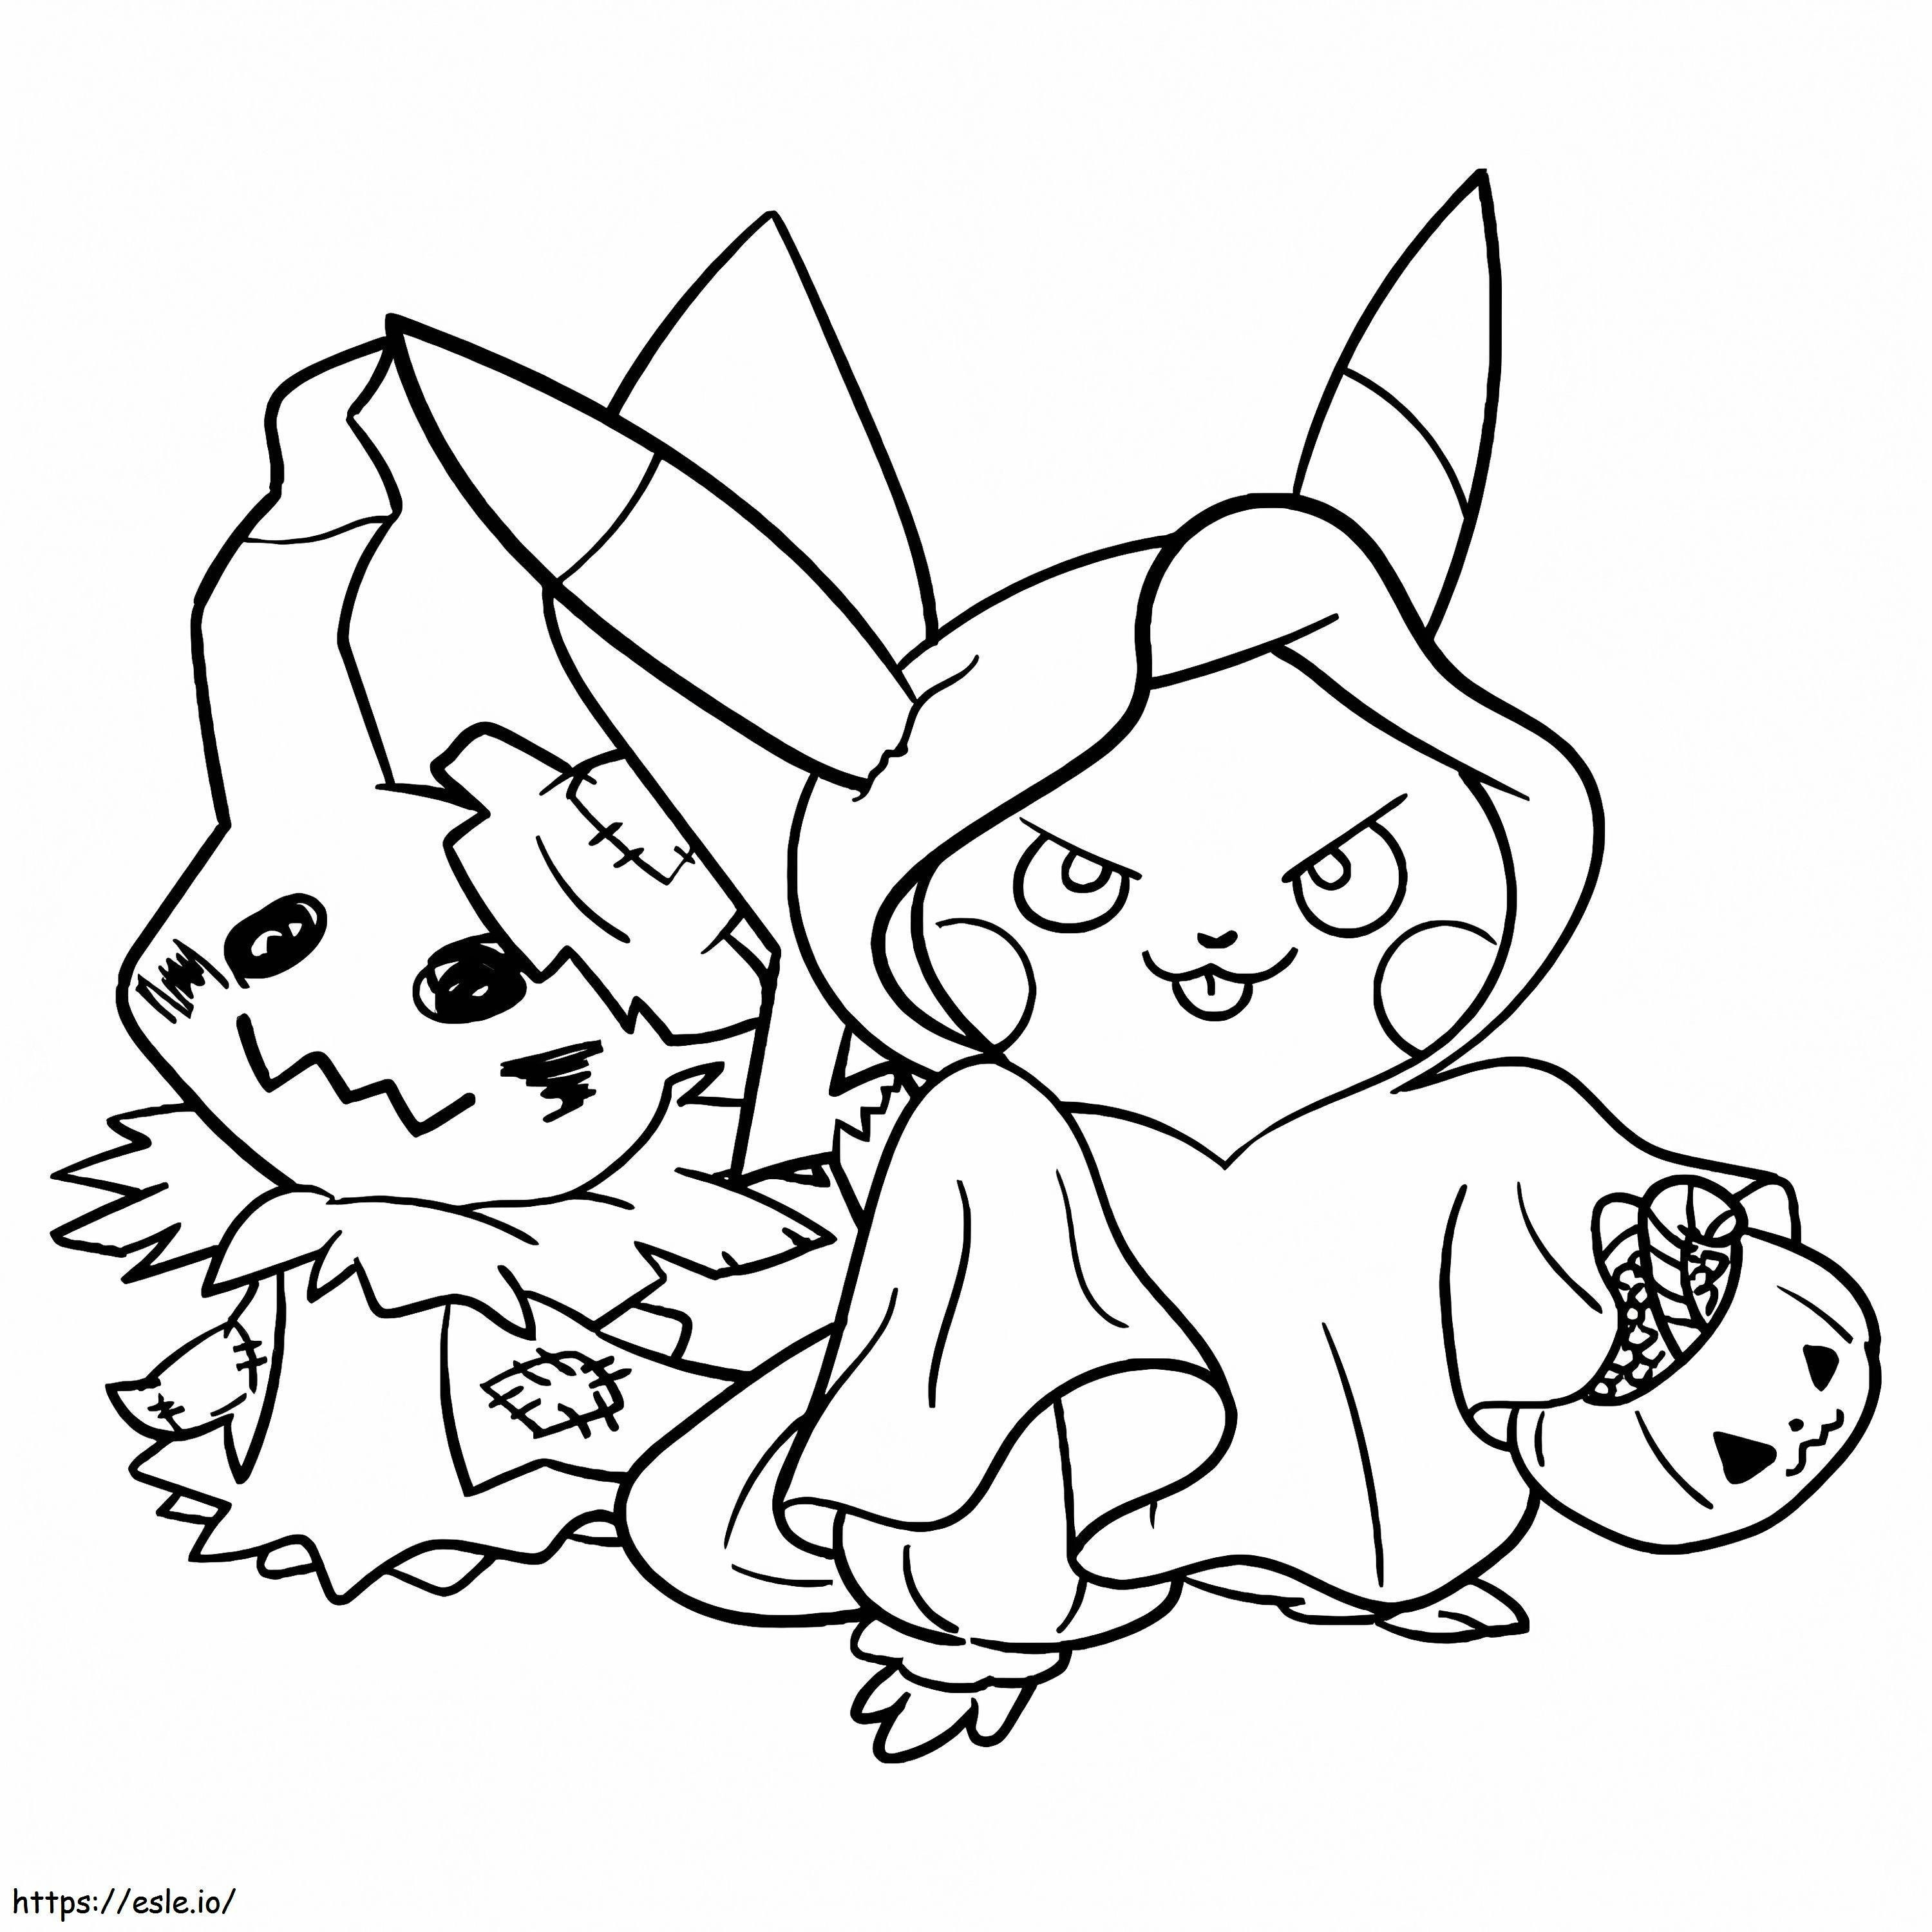 Cute Pokemon Halloween coloring page